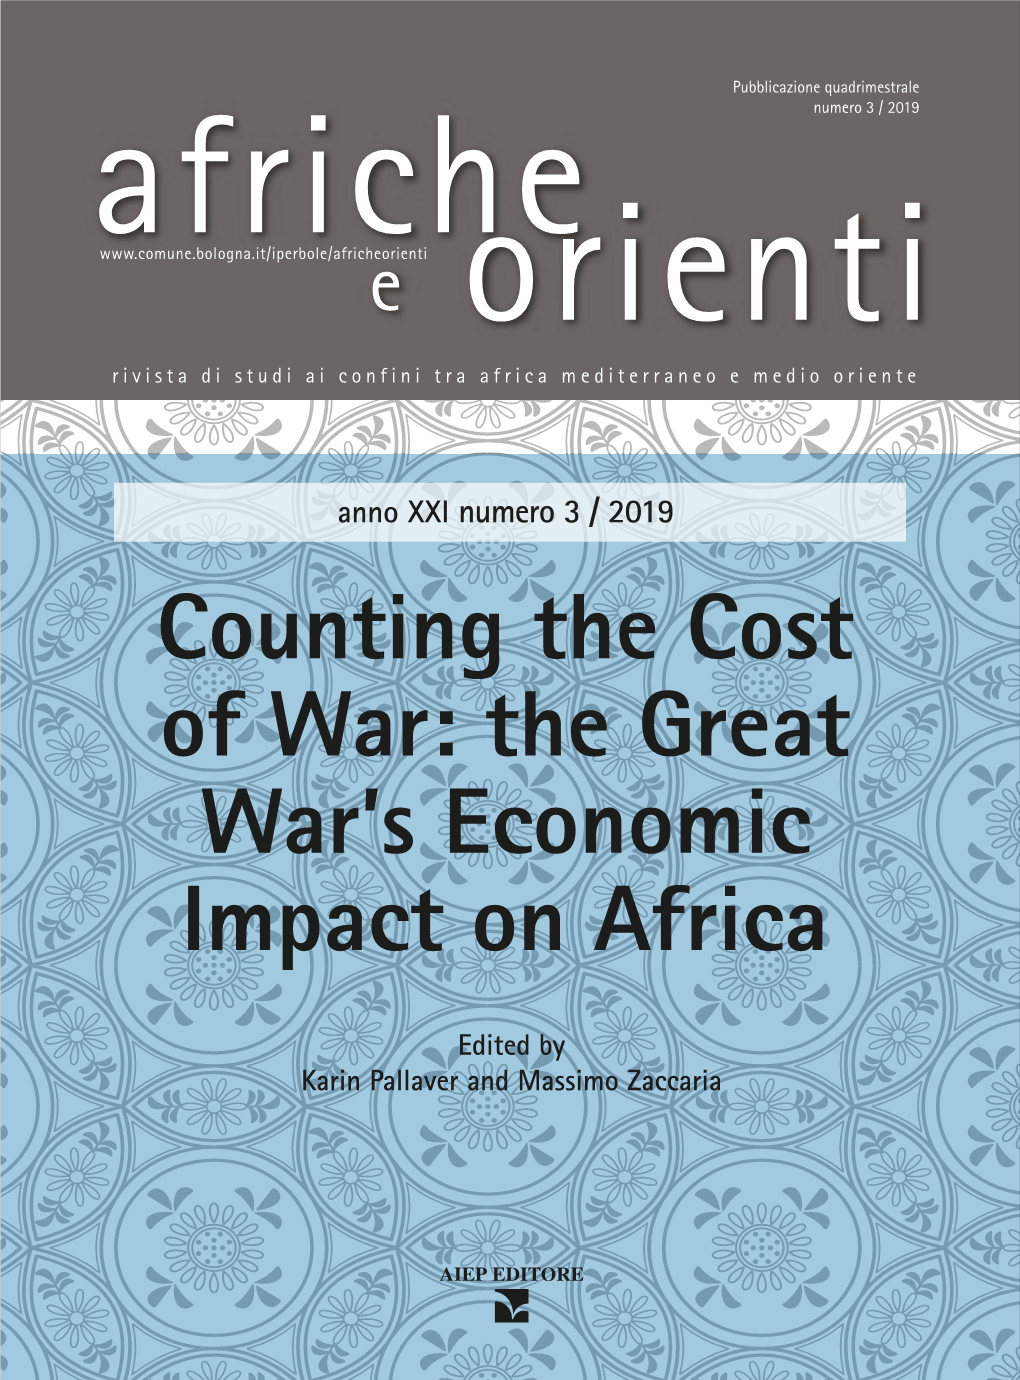 Counting the Cost of War: the Great War’S Economic Impact on Africa